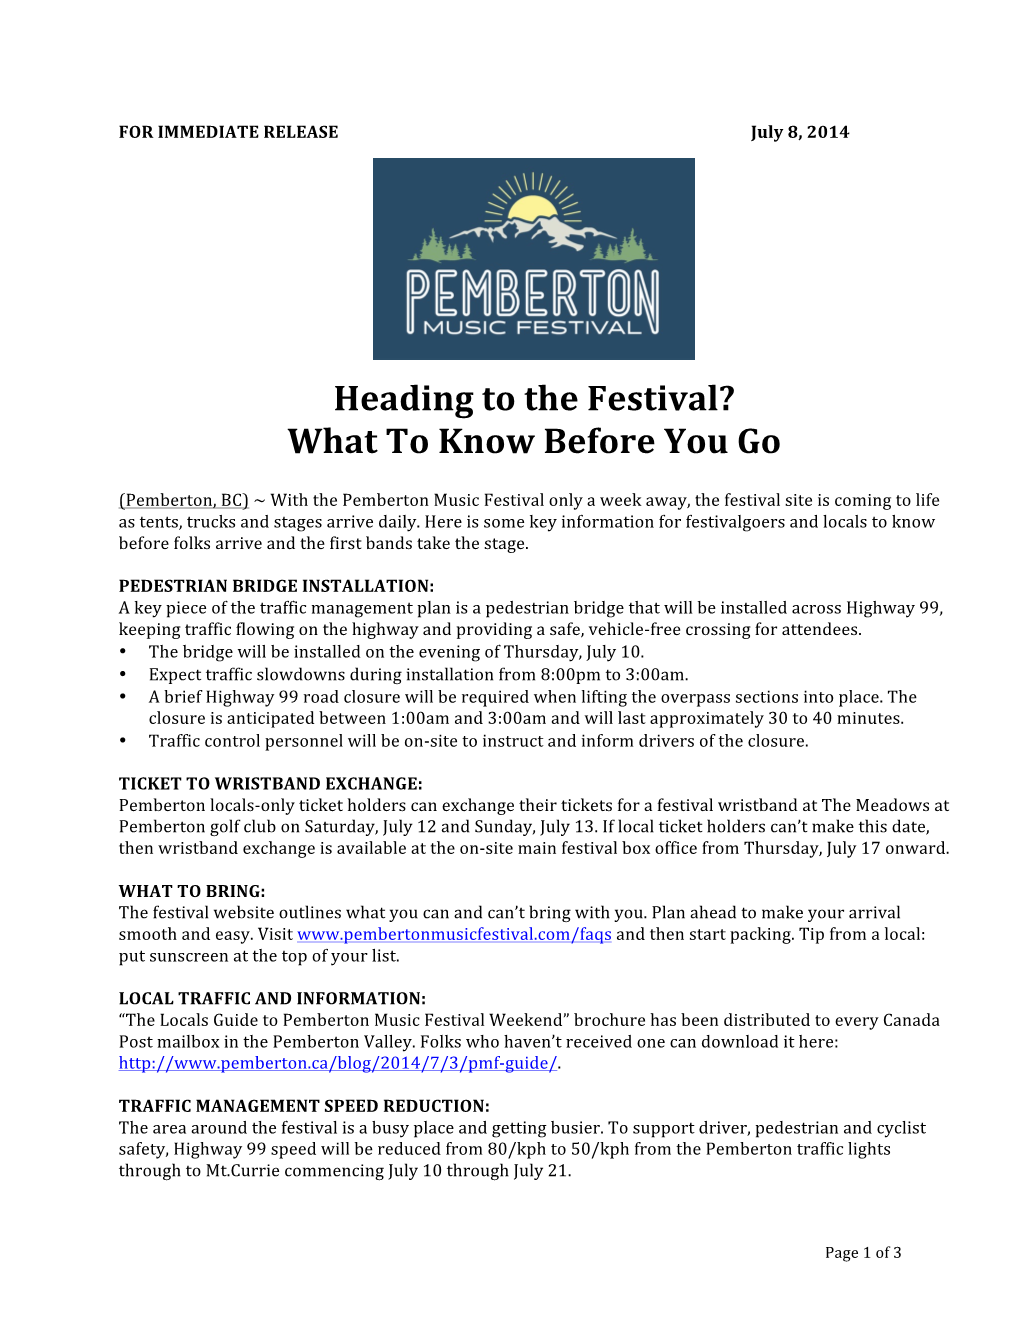 Heading to the Festival? What to Know Before You Go